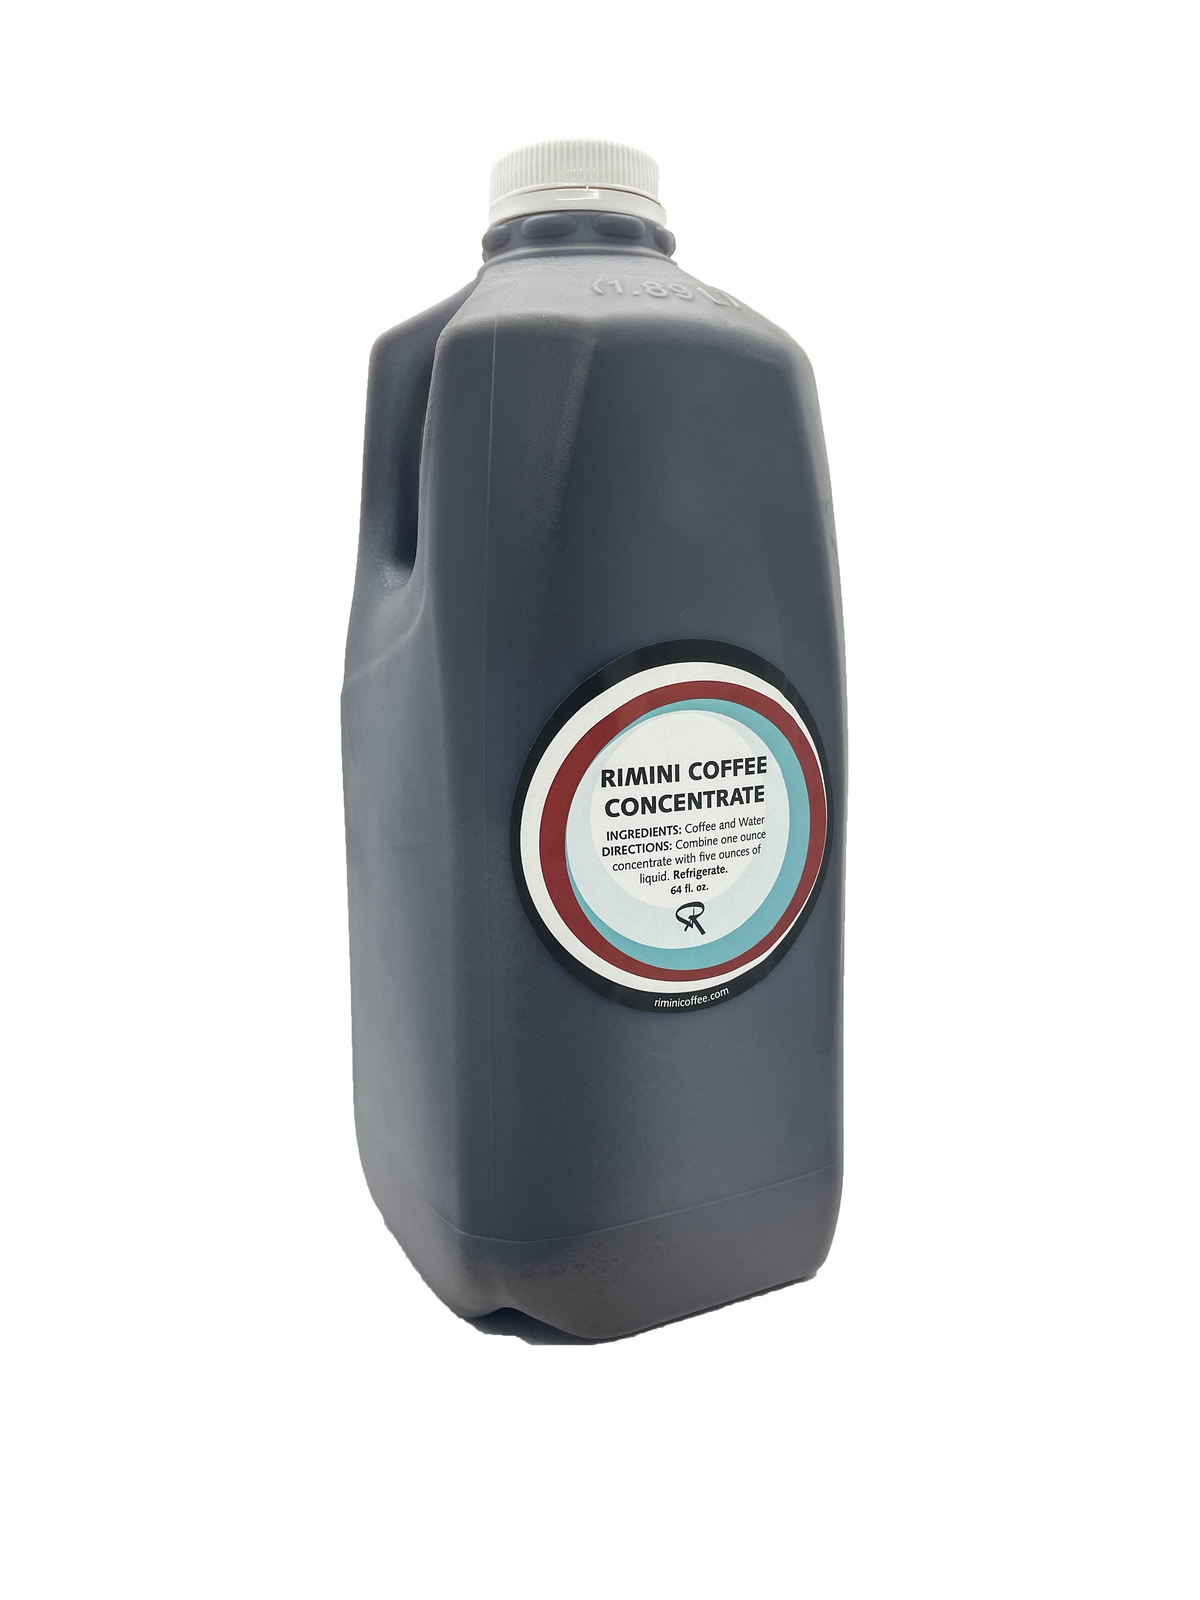 RIMINI COFFEE COLD BREW CONCENTRATE - Available In Store Only